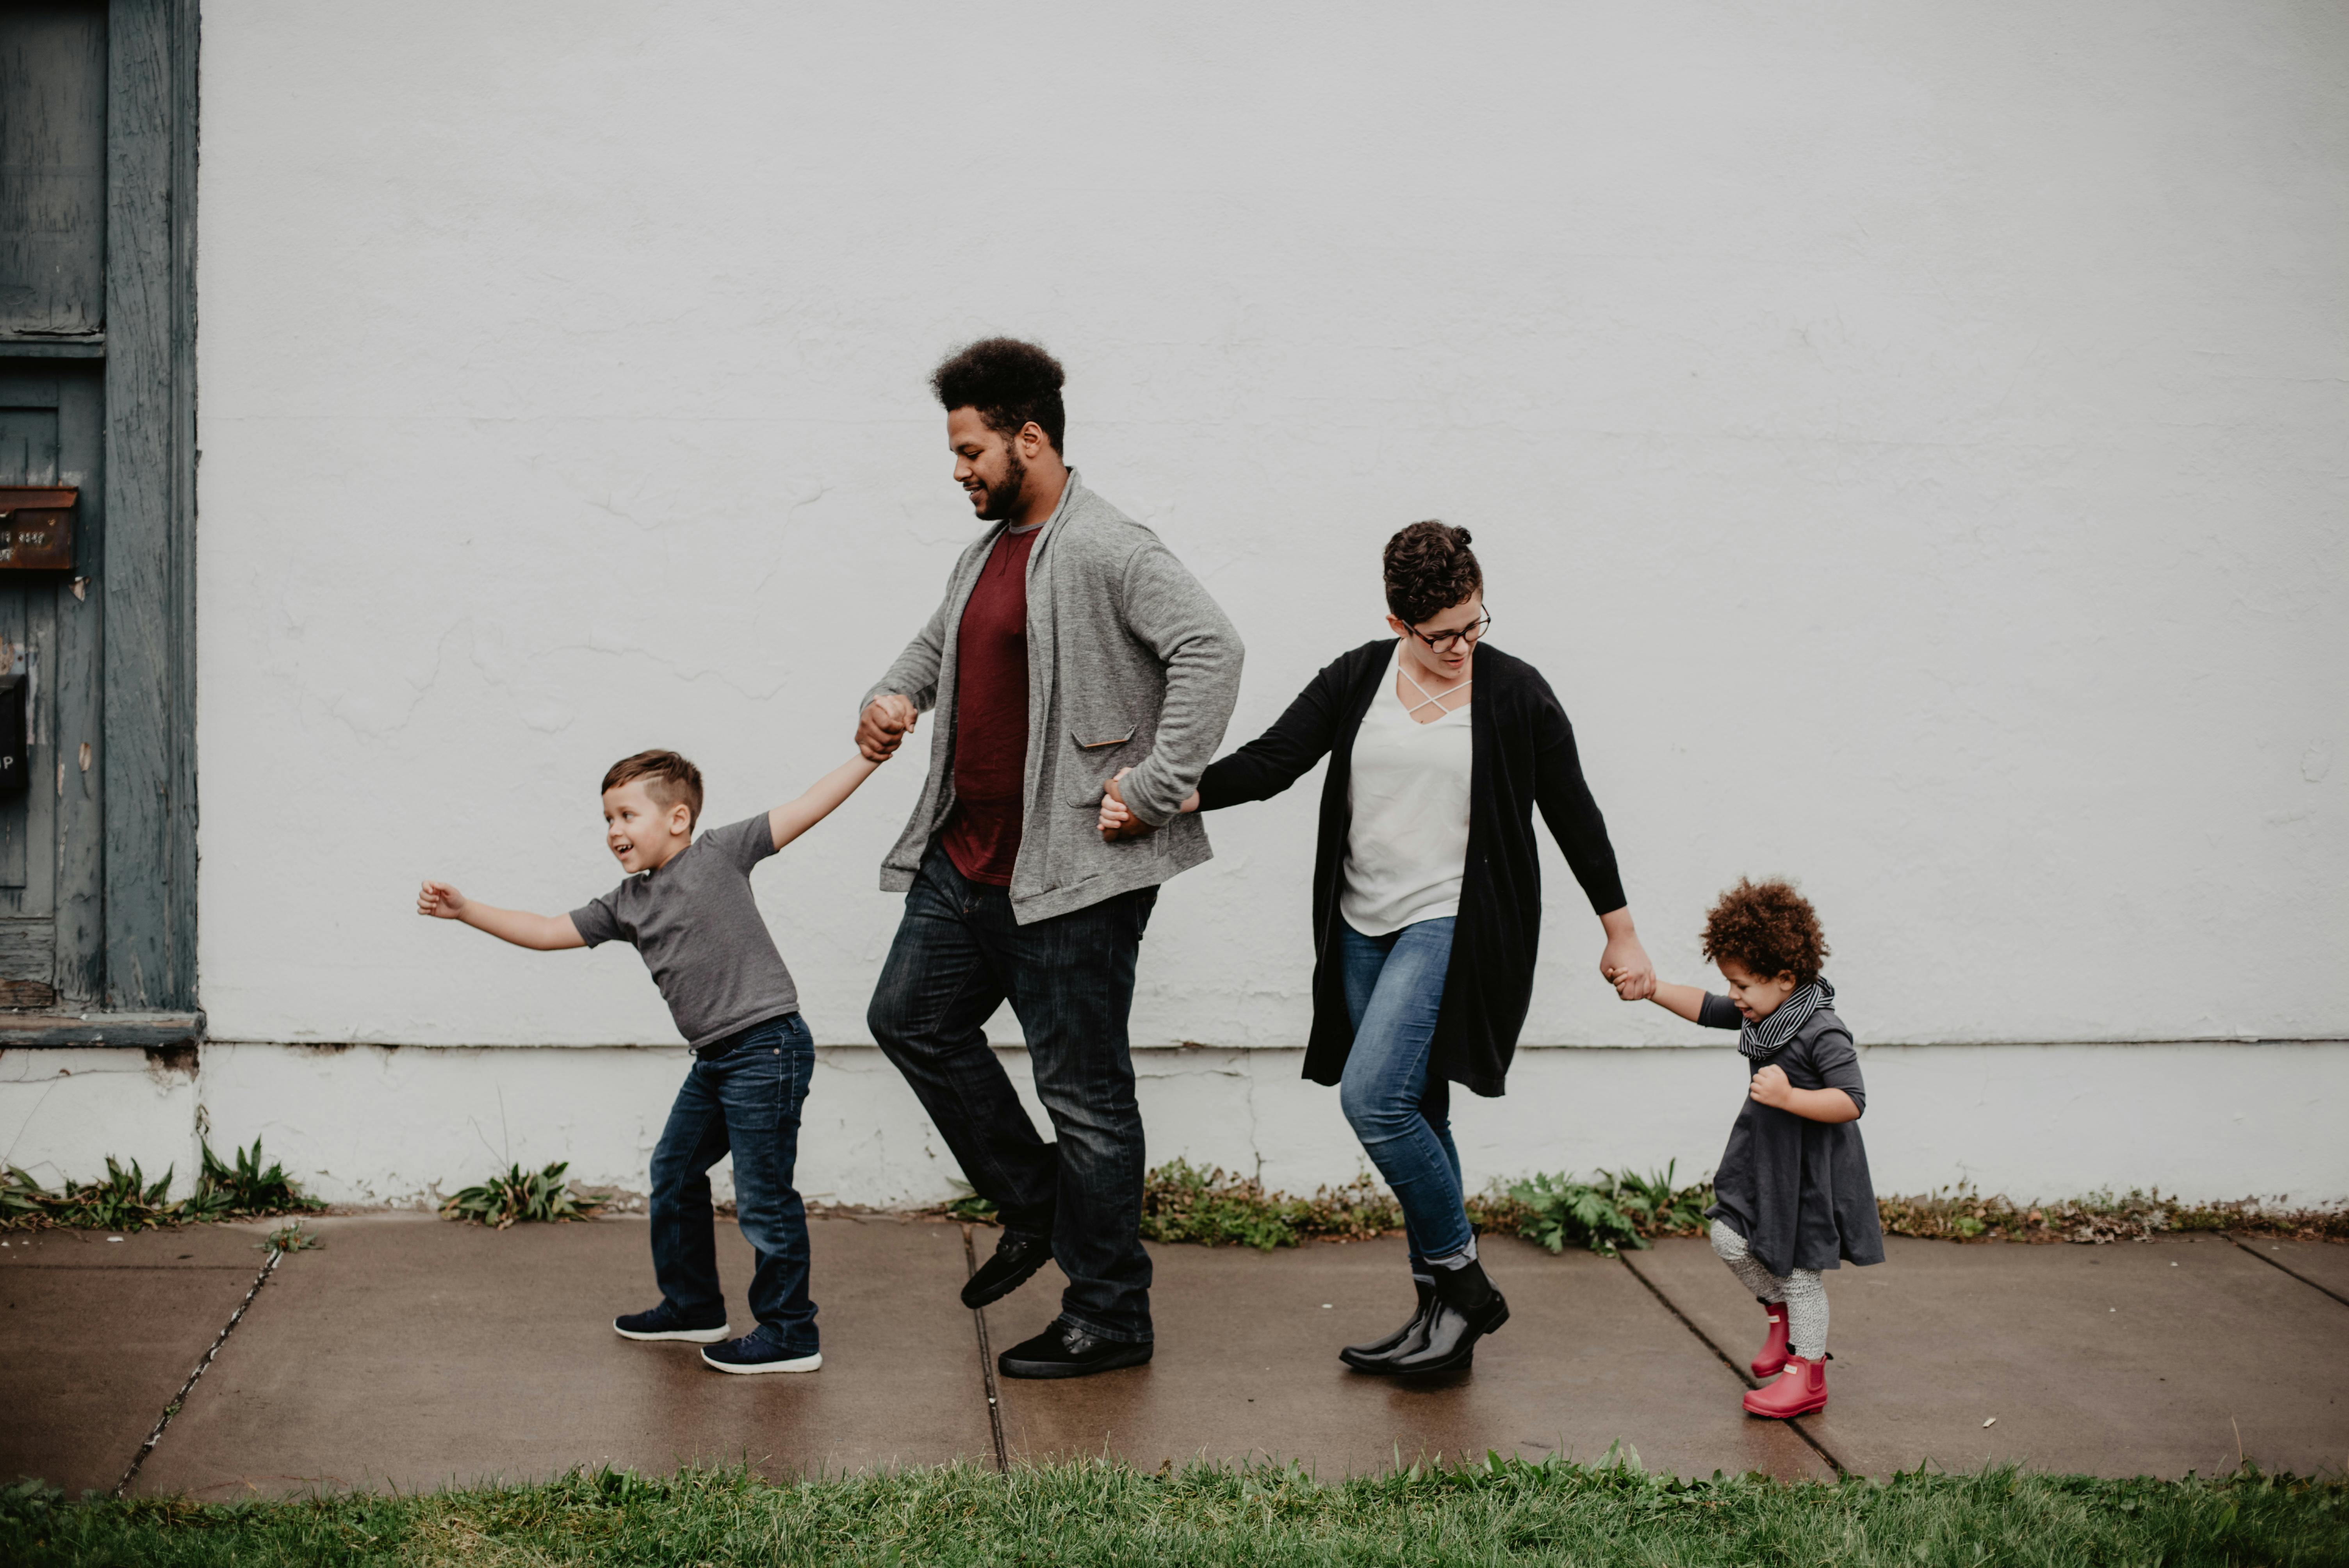 A family of four holding hands and walking | Source: Pexels